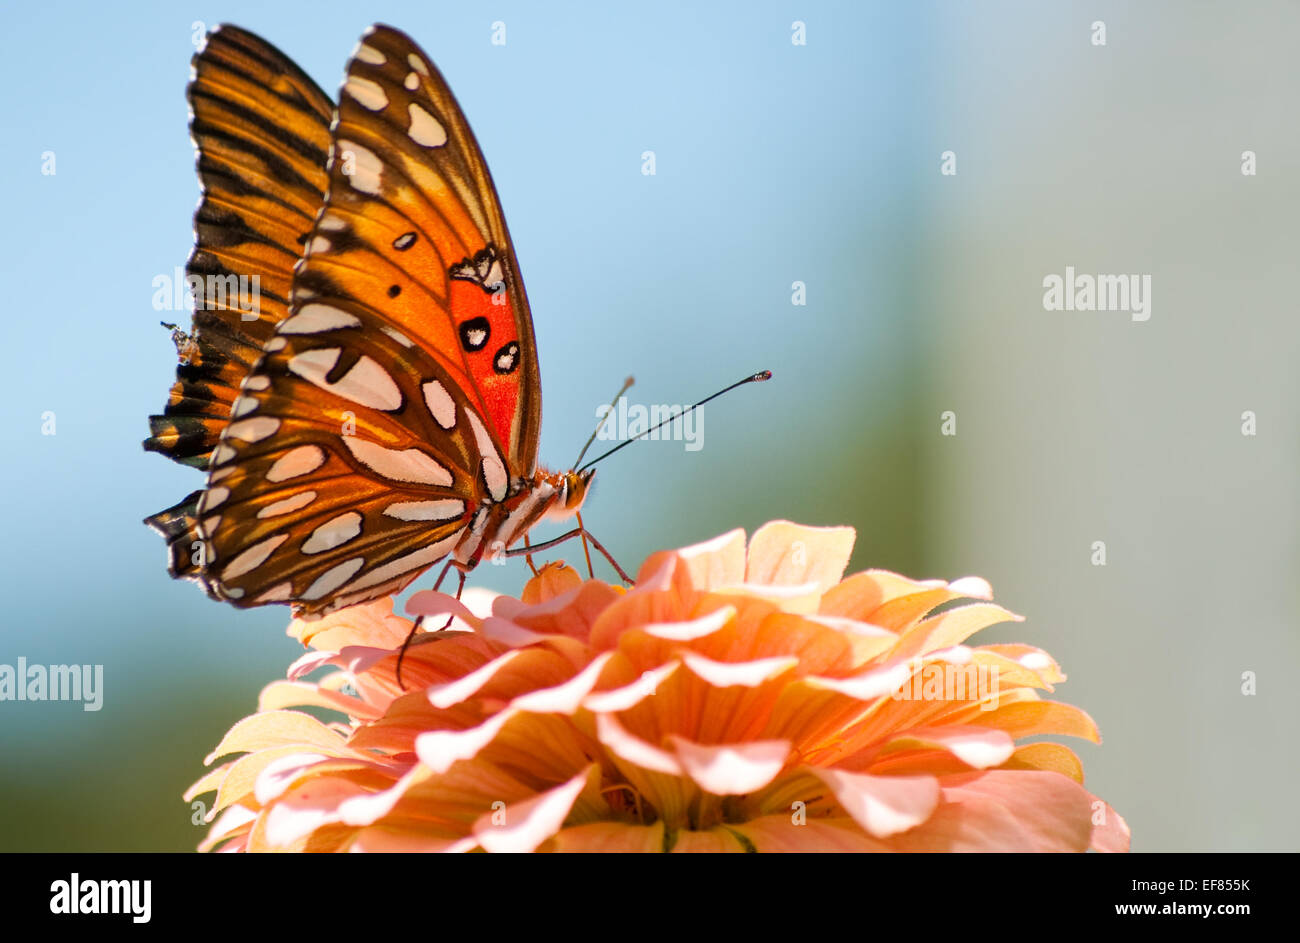 Agraulis Vanillae, Gulf Fritillary butterfly feeding on a coral colored Zinnia flower Stock Photo